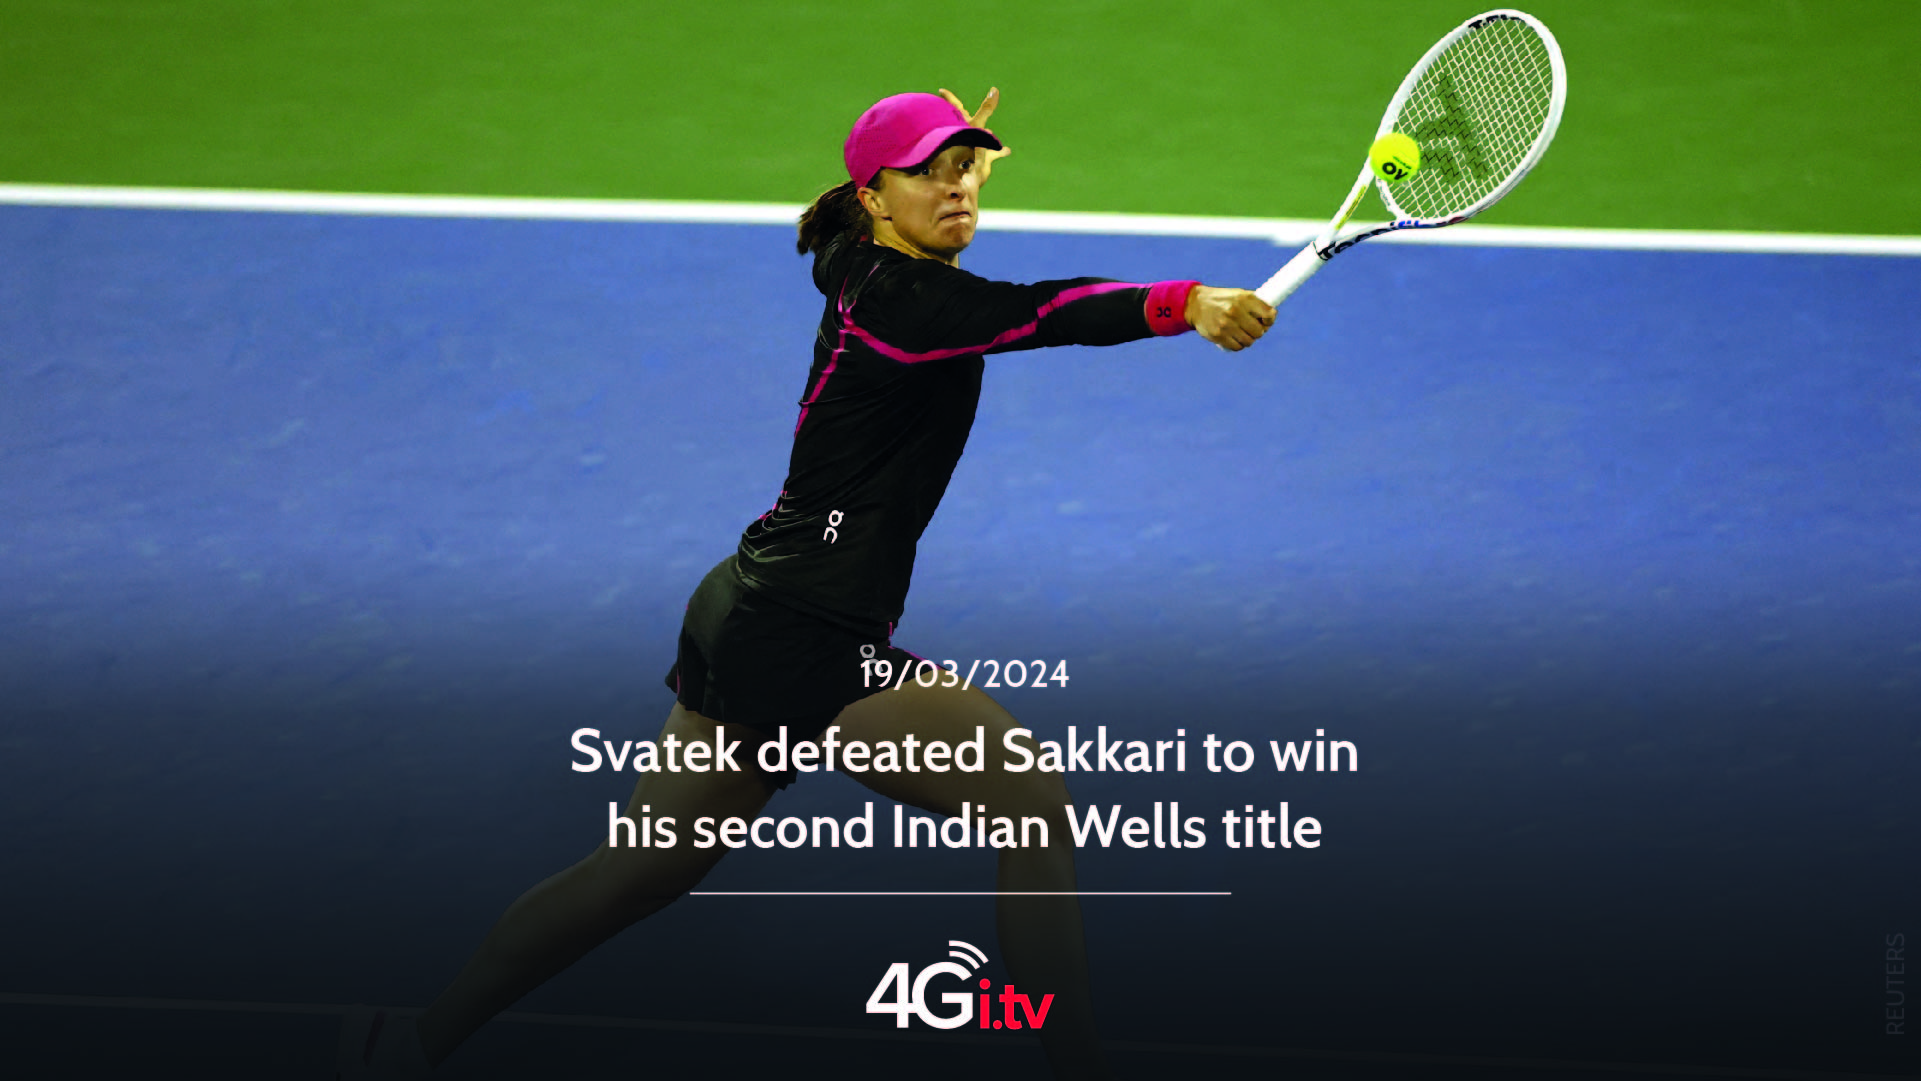 Read more about the article Svatek defeated Sakkari to win his second Indian Wells title